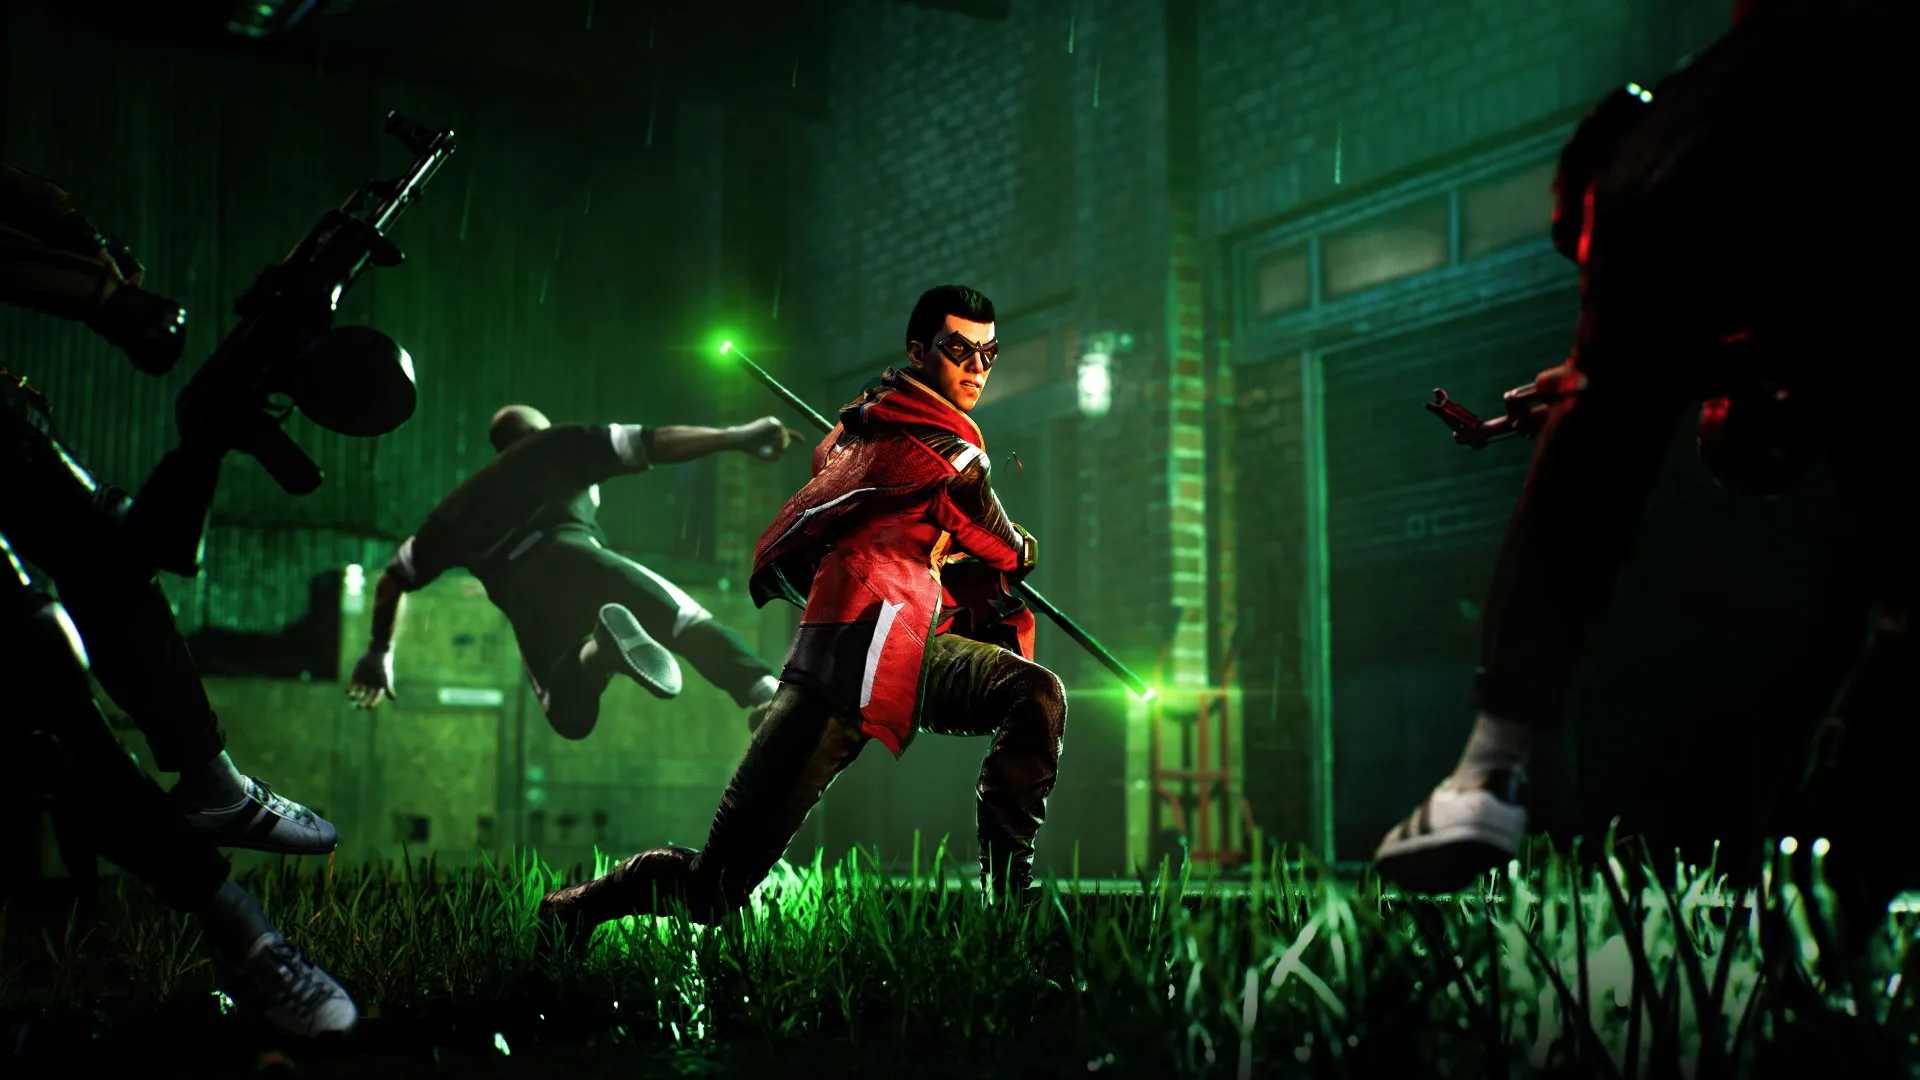 Gotham Knights Gameplay Trailer showcases Nightwing and Red Hood